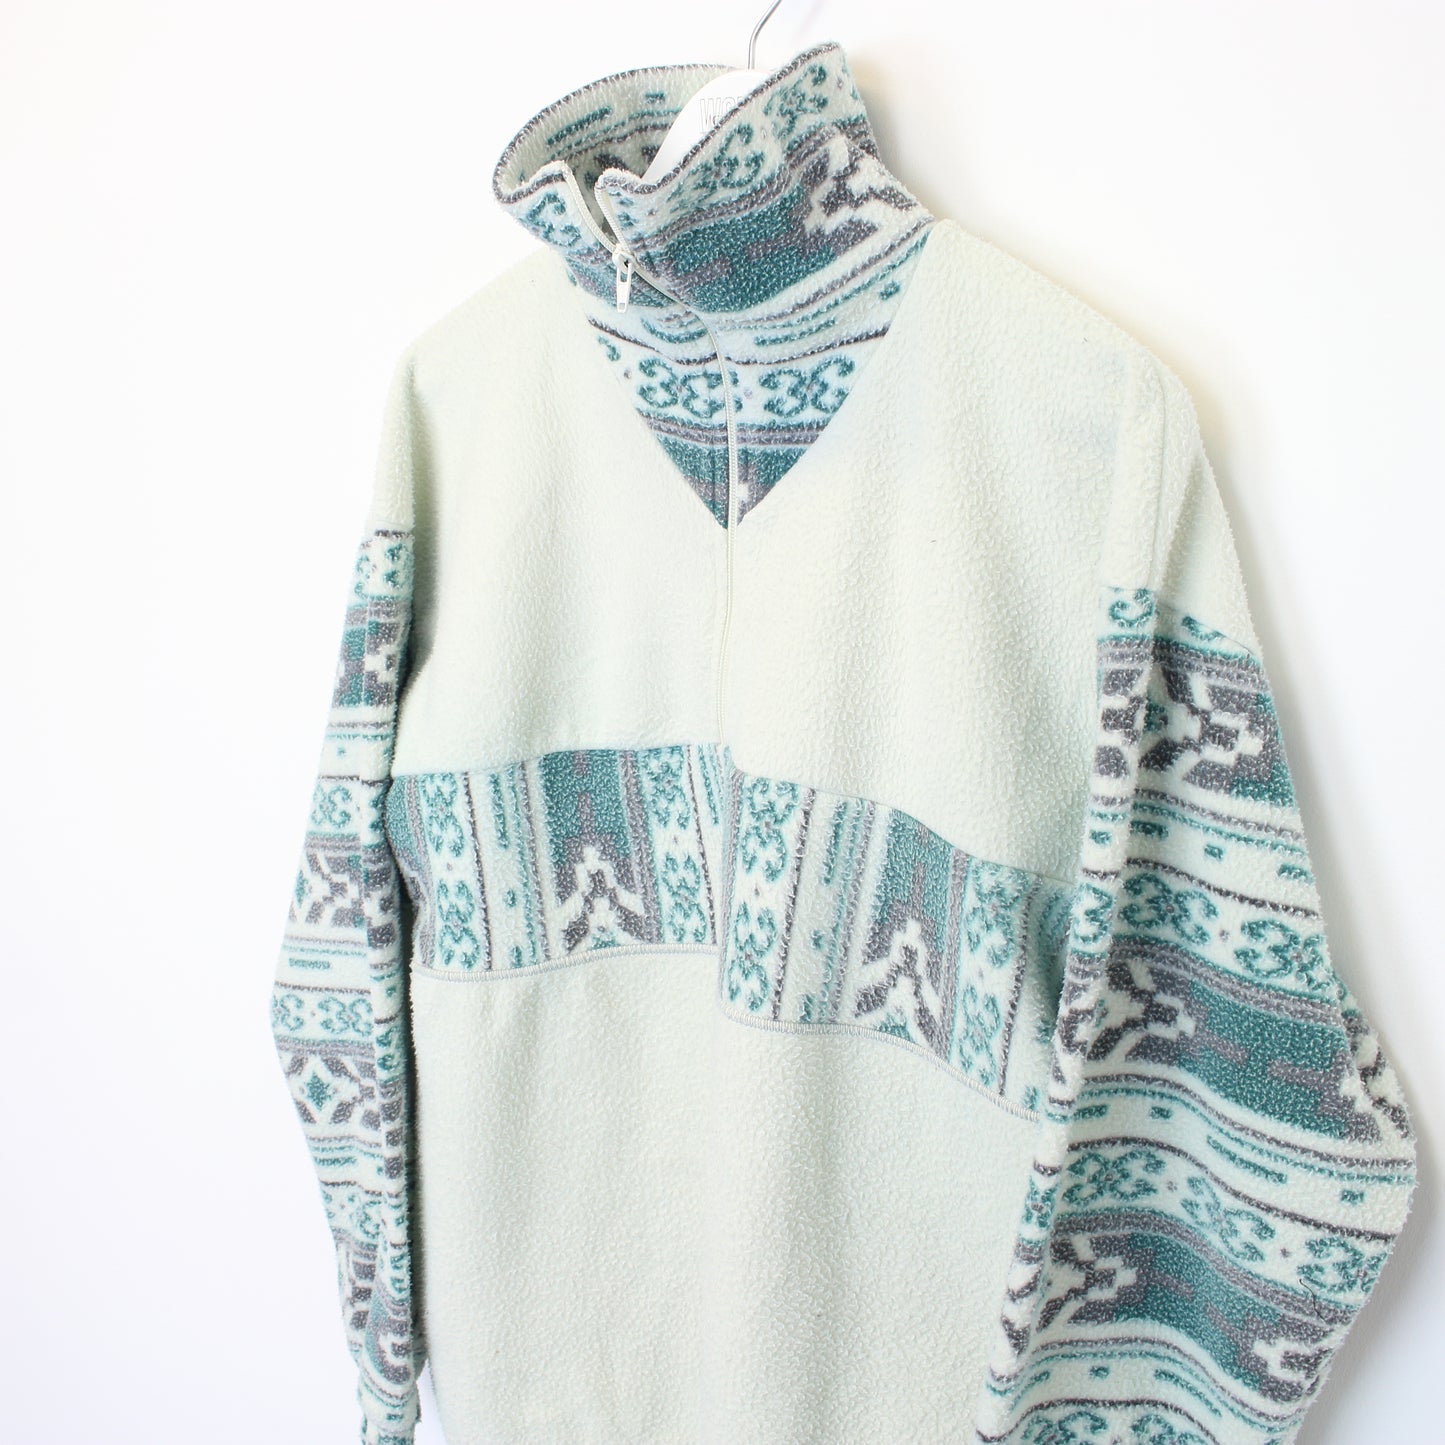 Vintage Unbranded crazy fleece in white and green. Best fits S